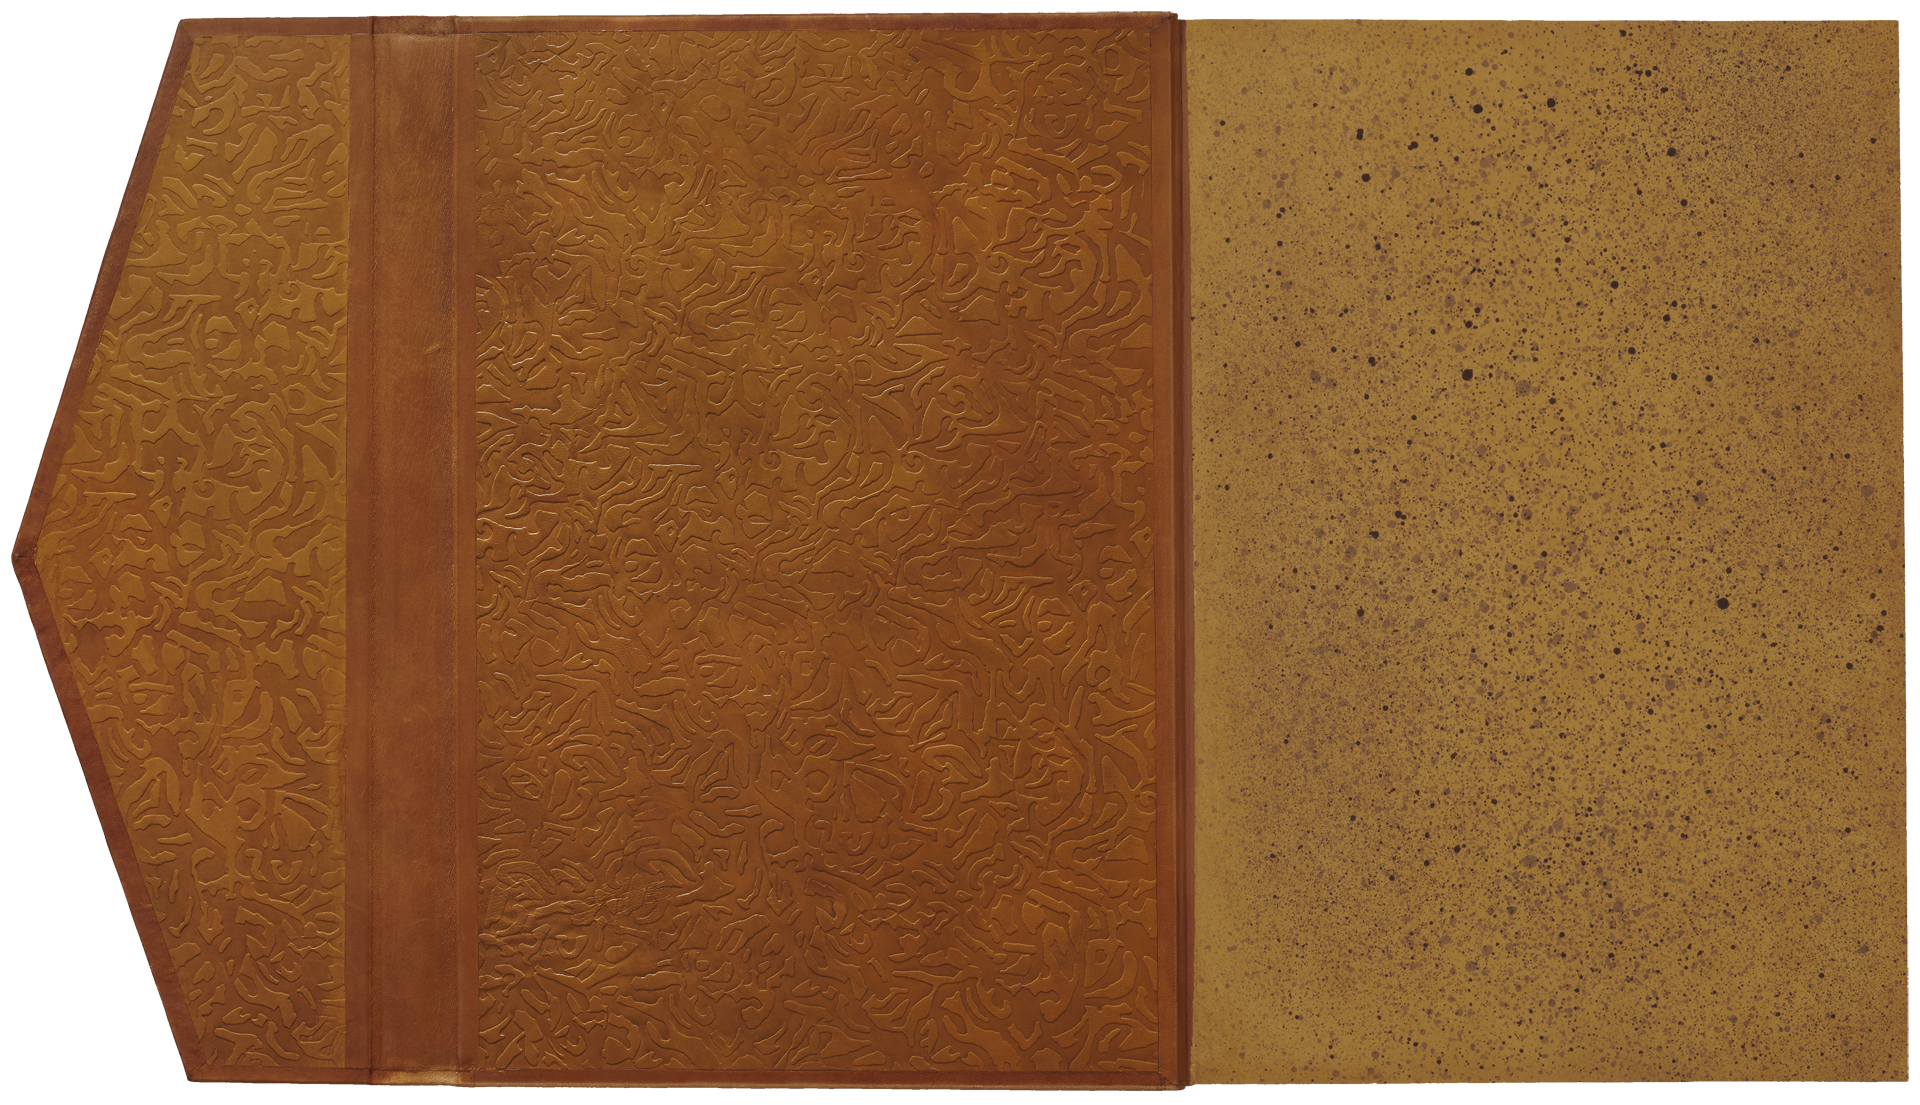 Baybars Qur'an facsimile binding - inside back cover revealing blind-embossing and specially created marbled endpapers - image © Copyright 2021 Facsimile Editions Ltd